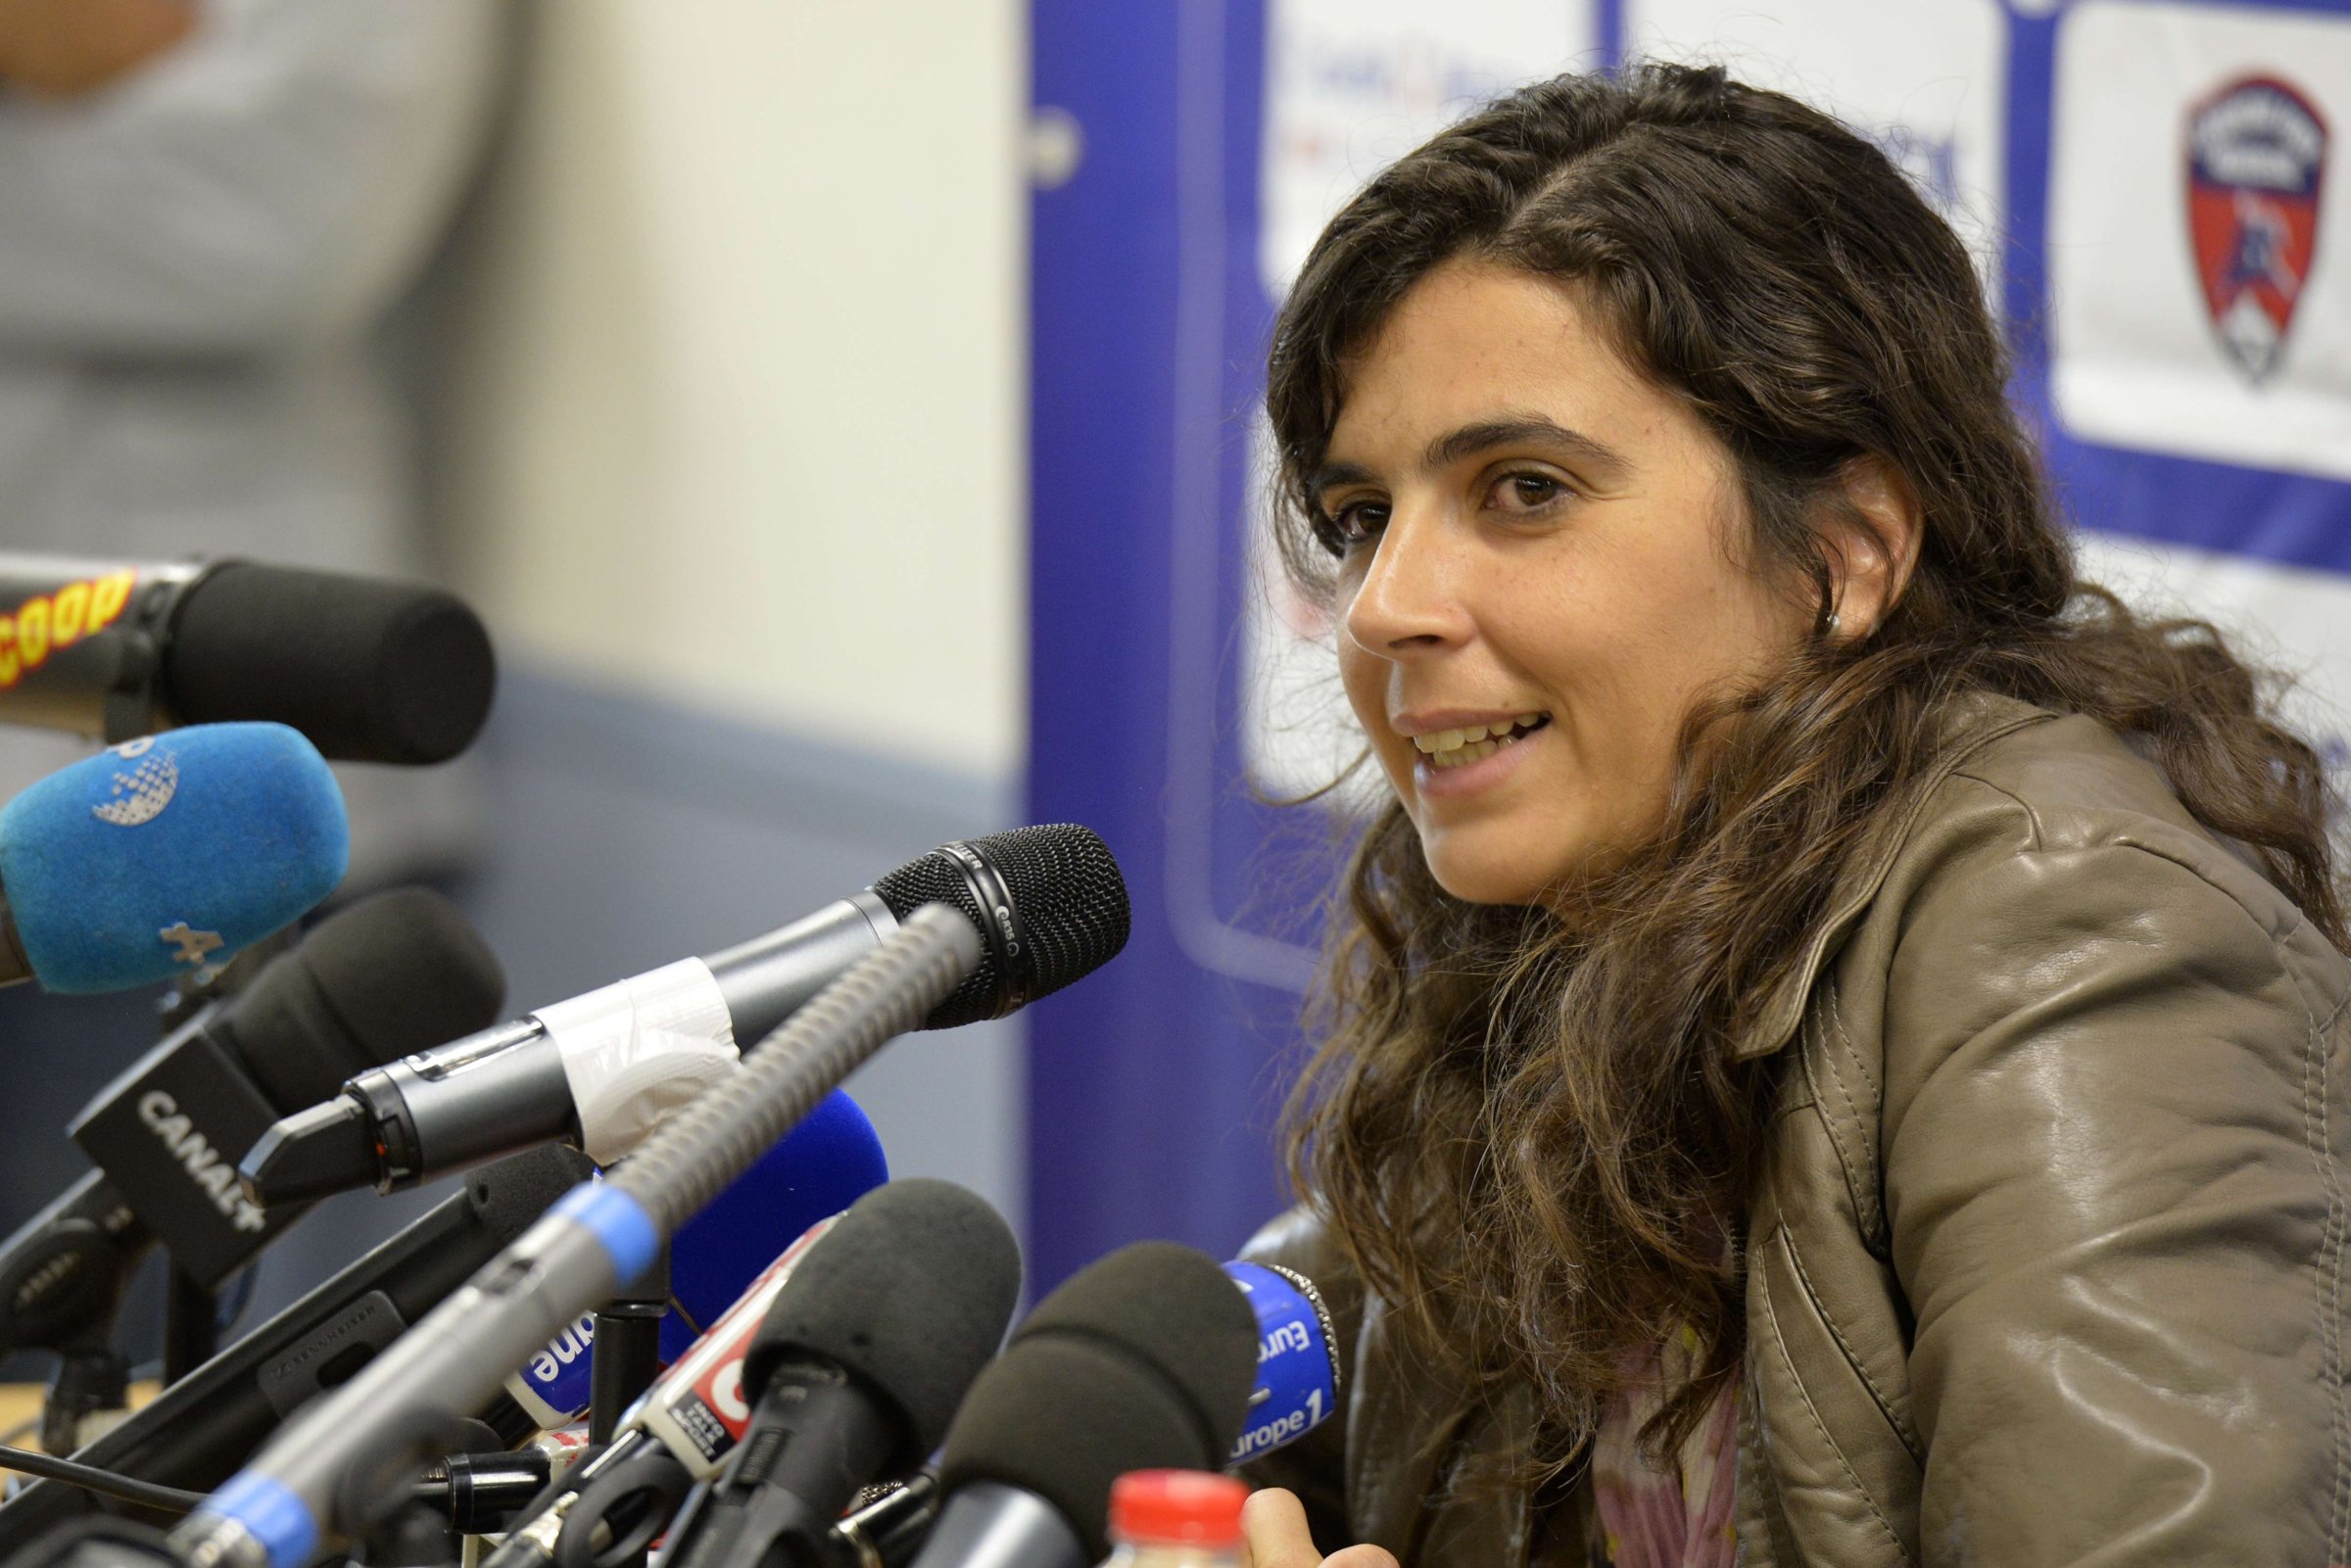 Portugal's Helena Costa speaks during a press conference on June 24, 2014 in Clermont-Ferrand, central France.